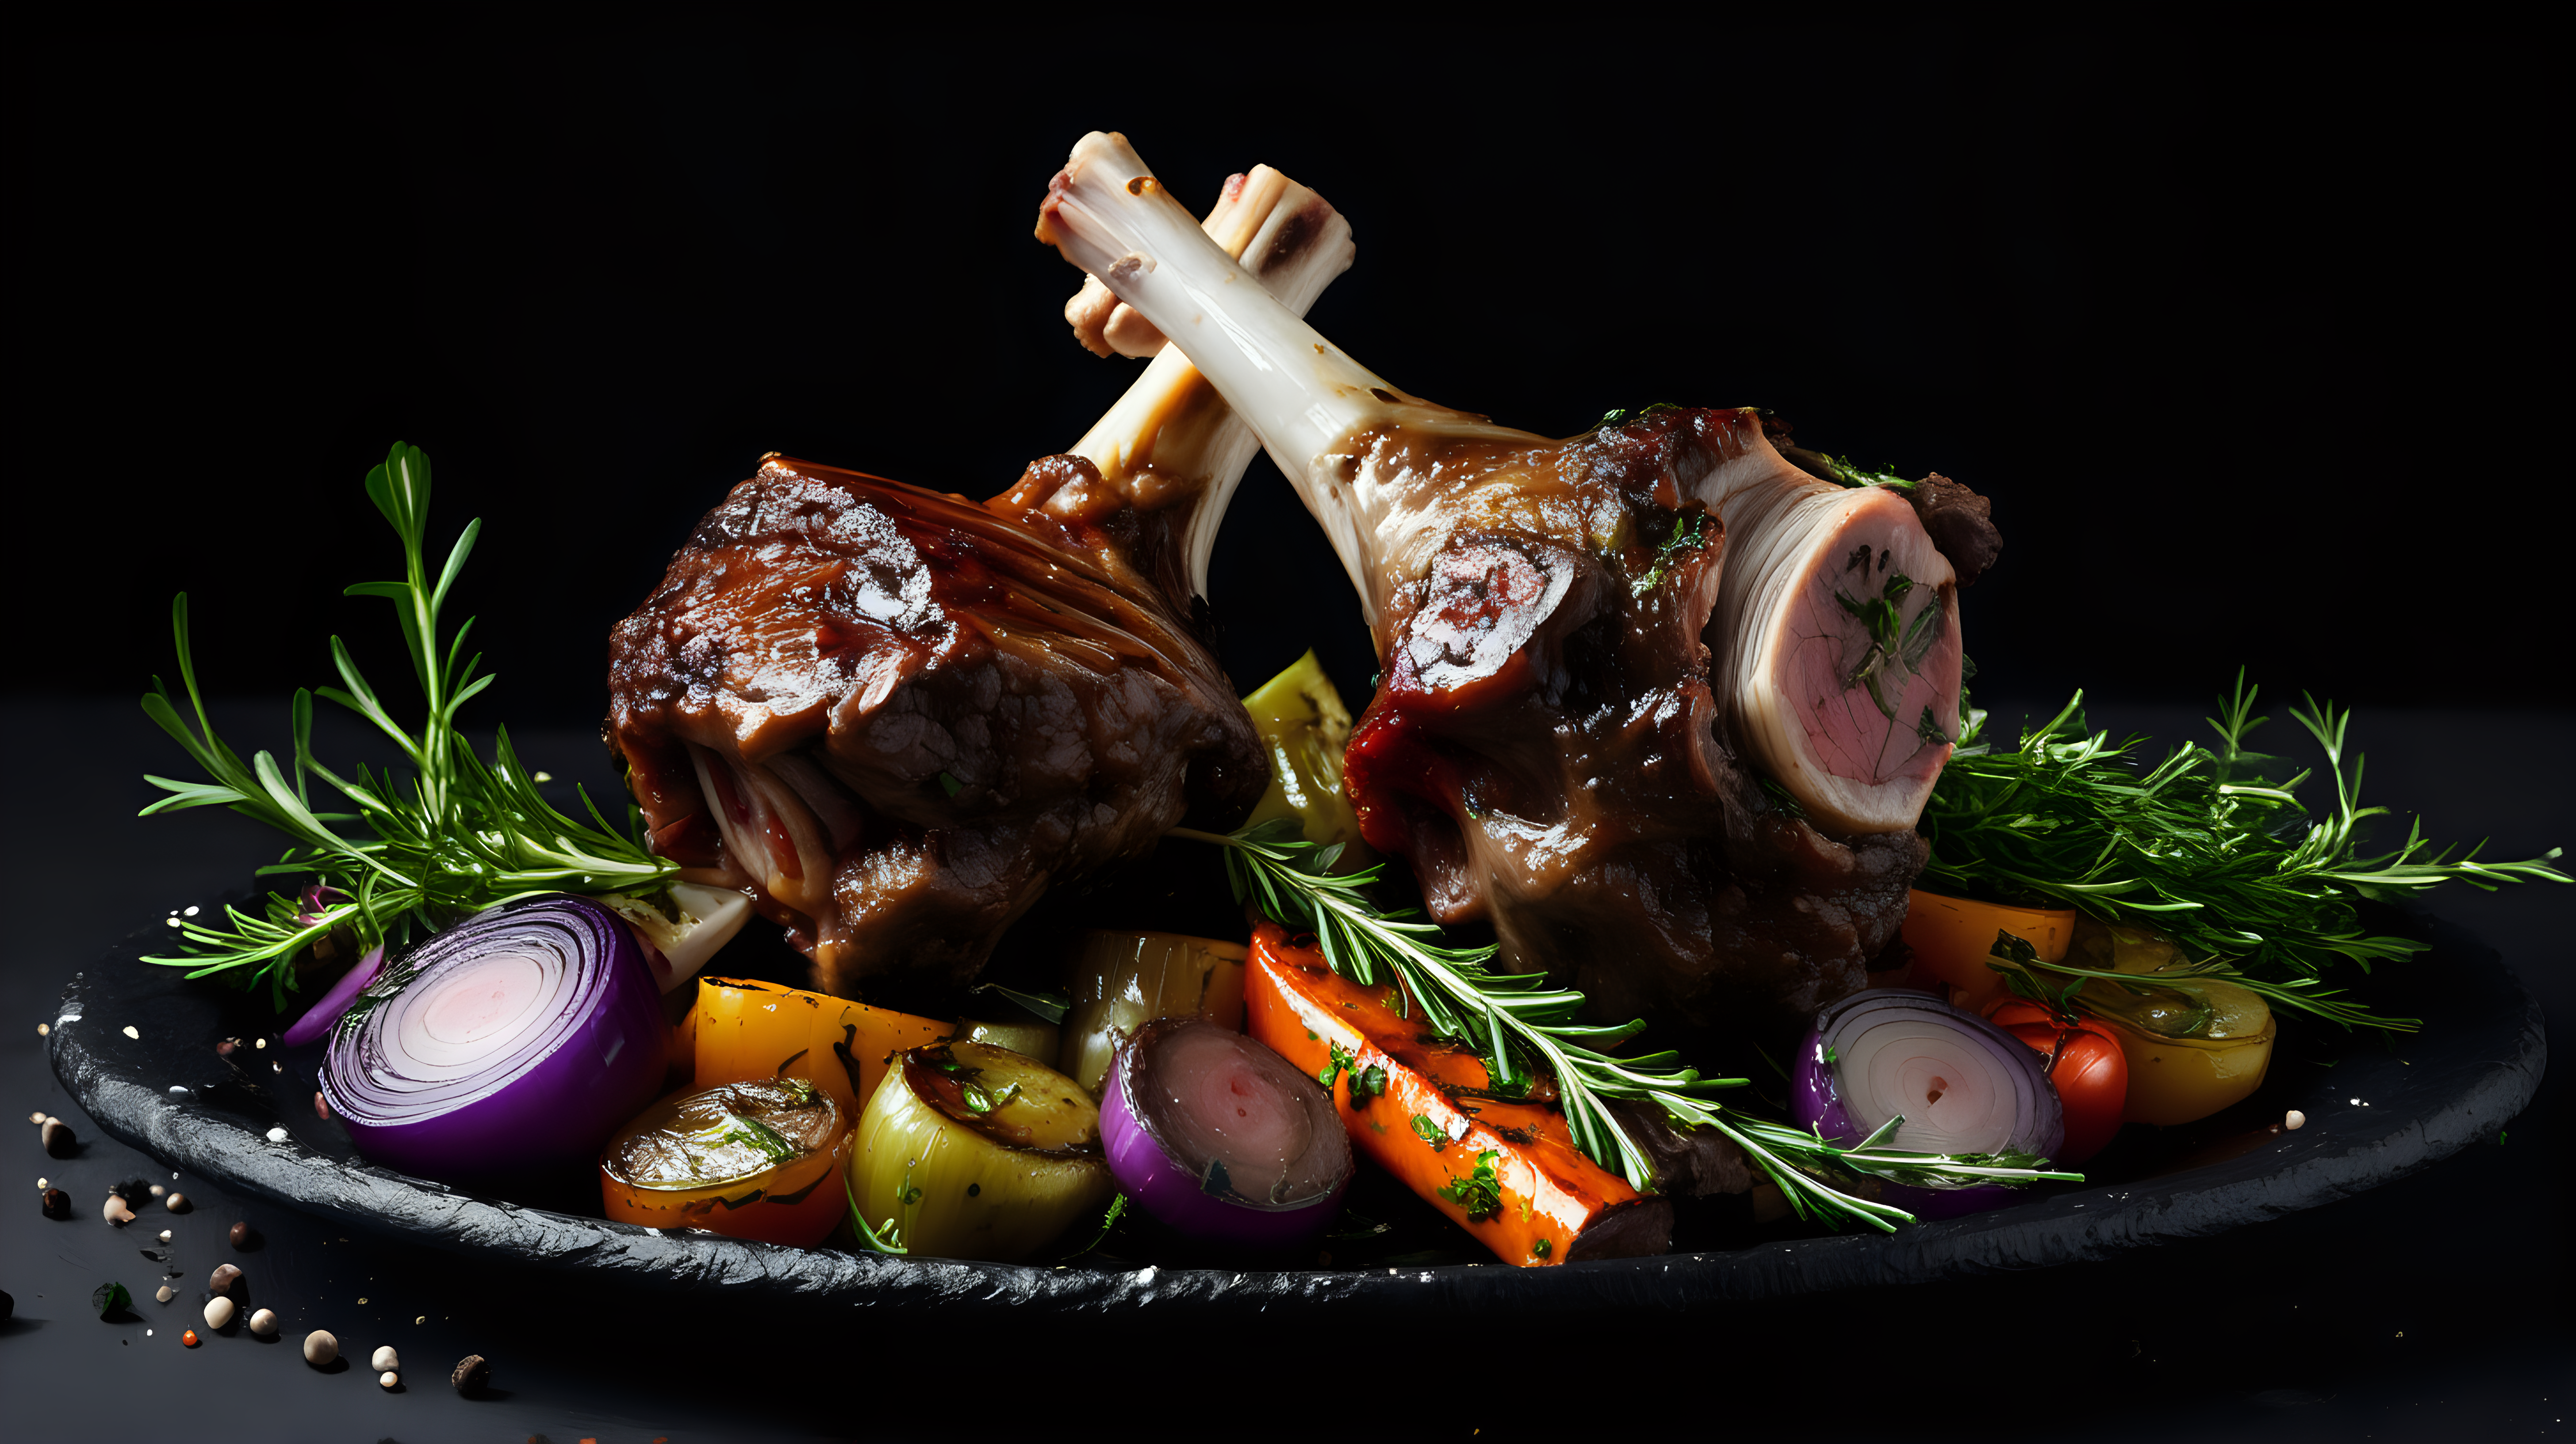 Grill lamb shank with herbs and vegetables black